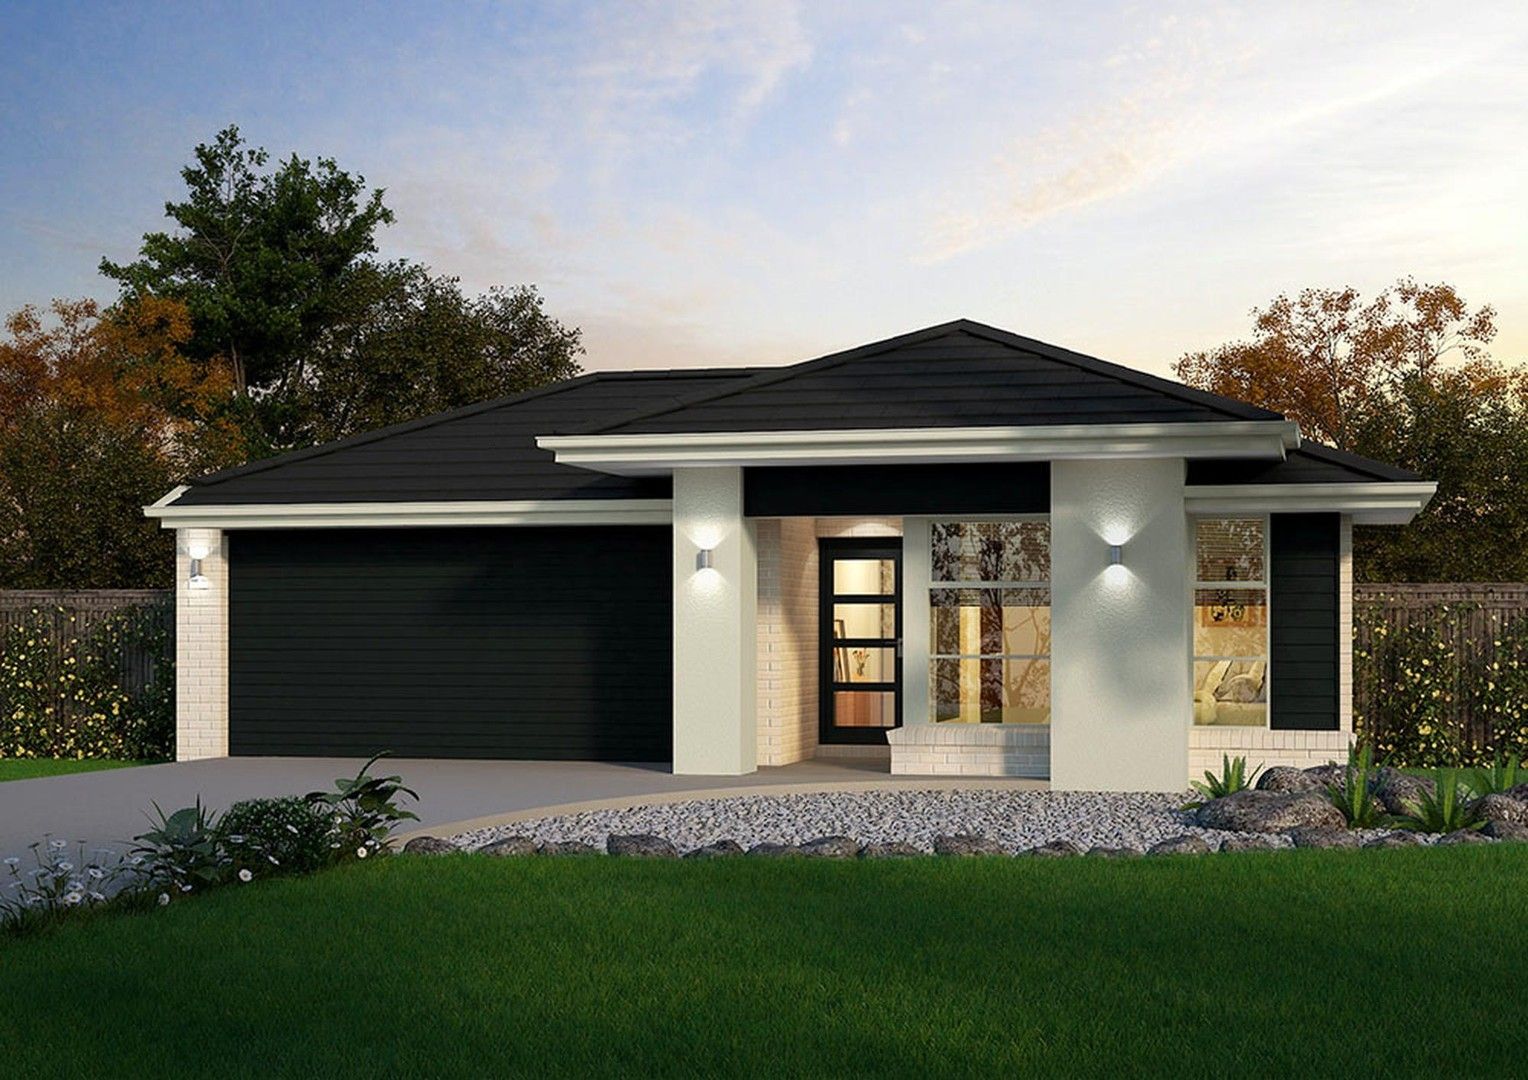 4 bedrooms New House & Land in 1595 Dutton Parade GAWLER EAST SA, 5118